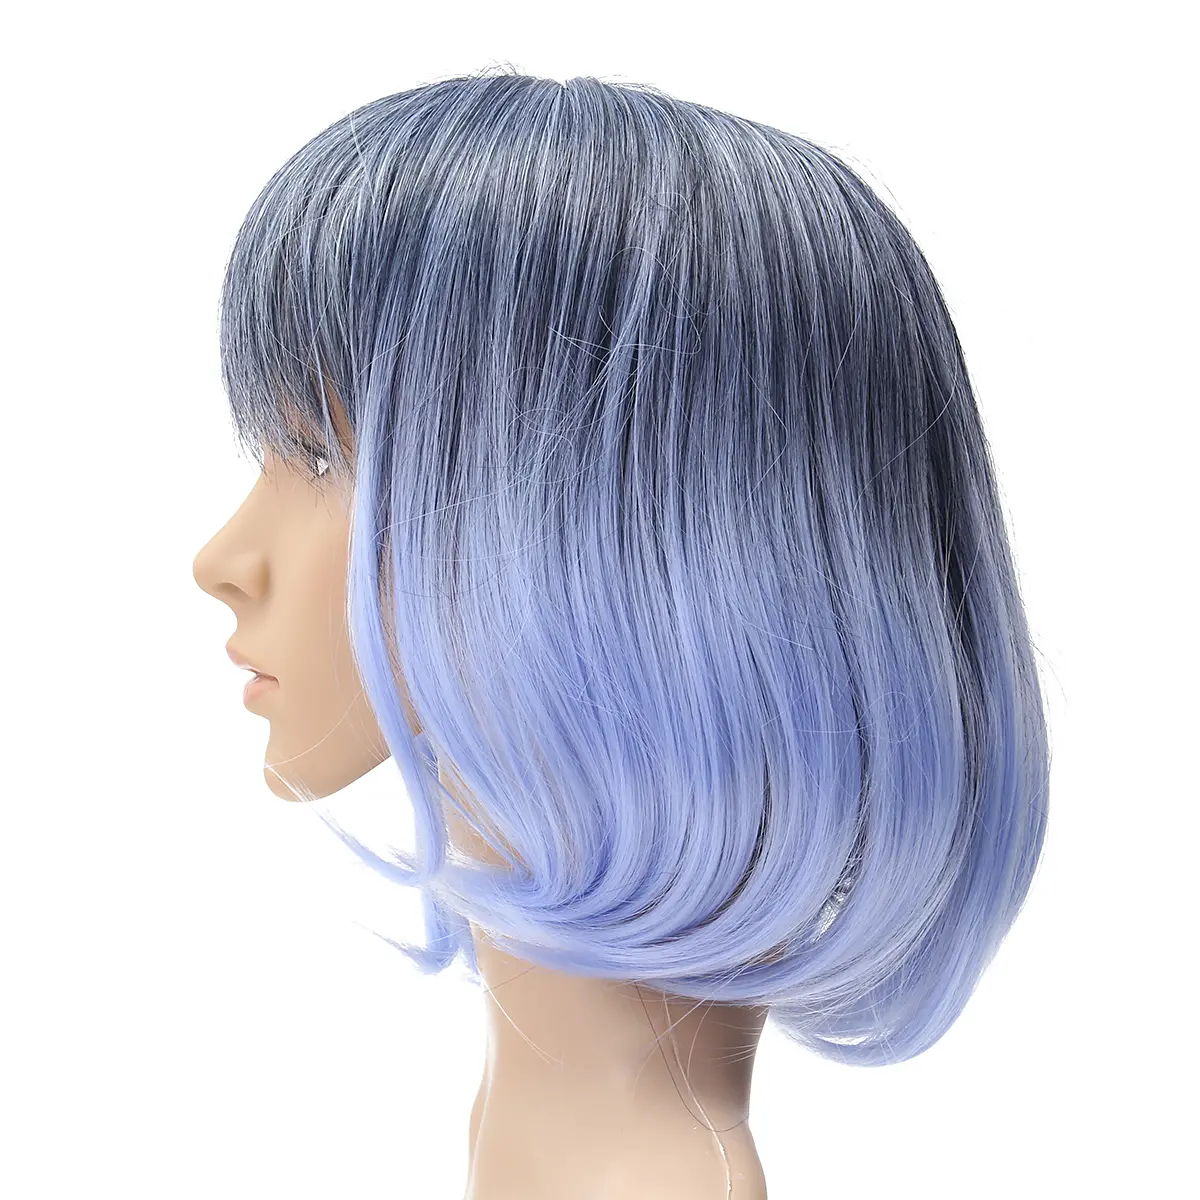 35-40cm Blue Gradient Cosplay Wig Woman Short Curly Hair Anime Natural Role Play Capless 